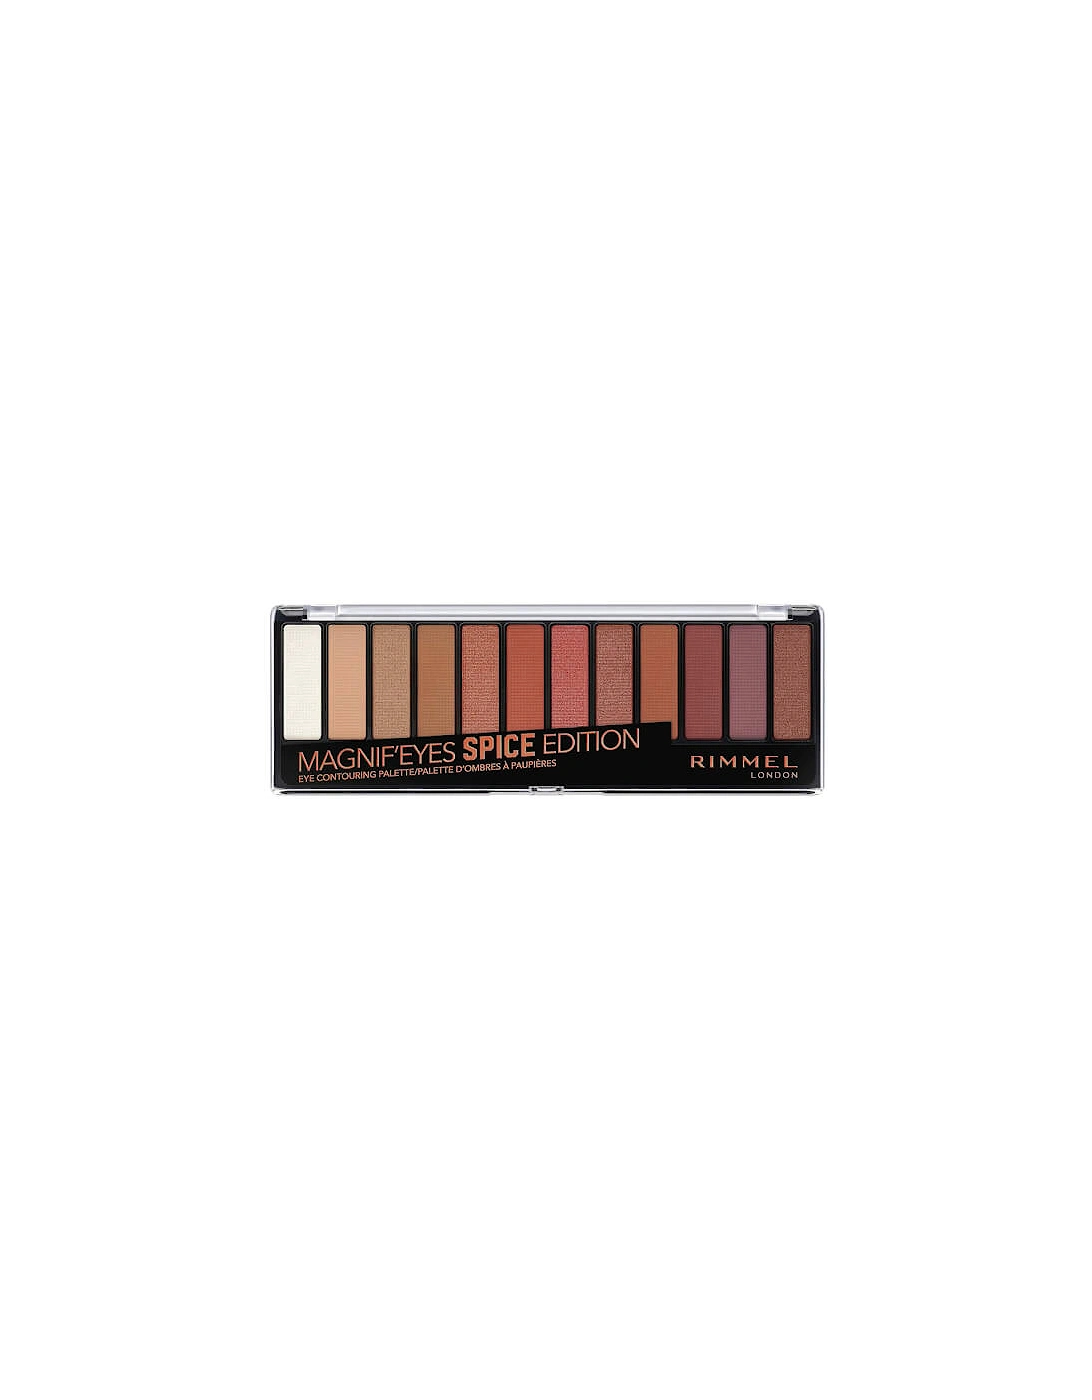 Magnif'eyes 12 Pan Shade Palette 14g - Spice, 2 of 1